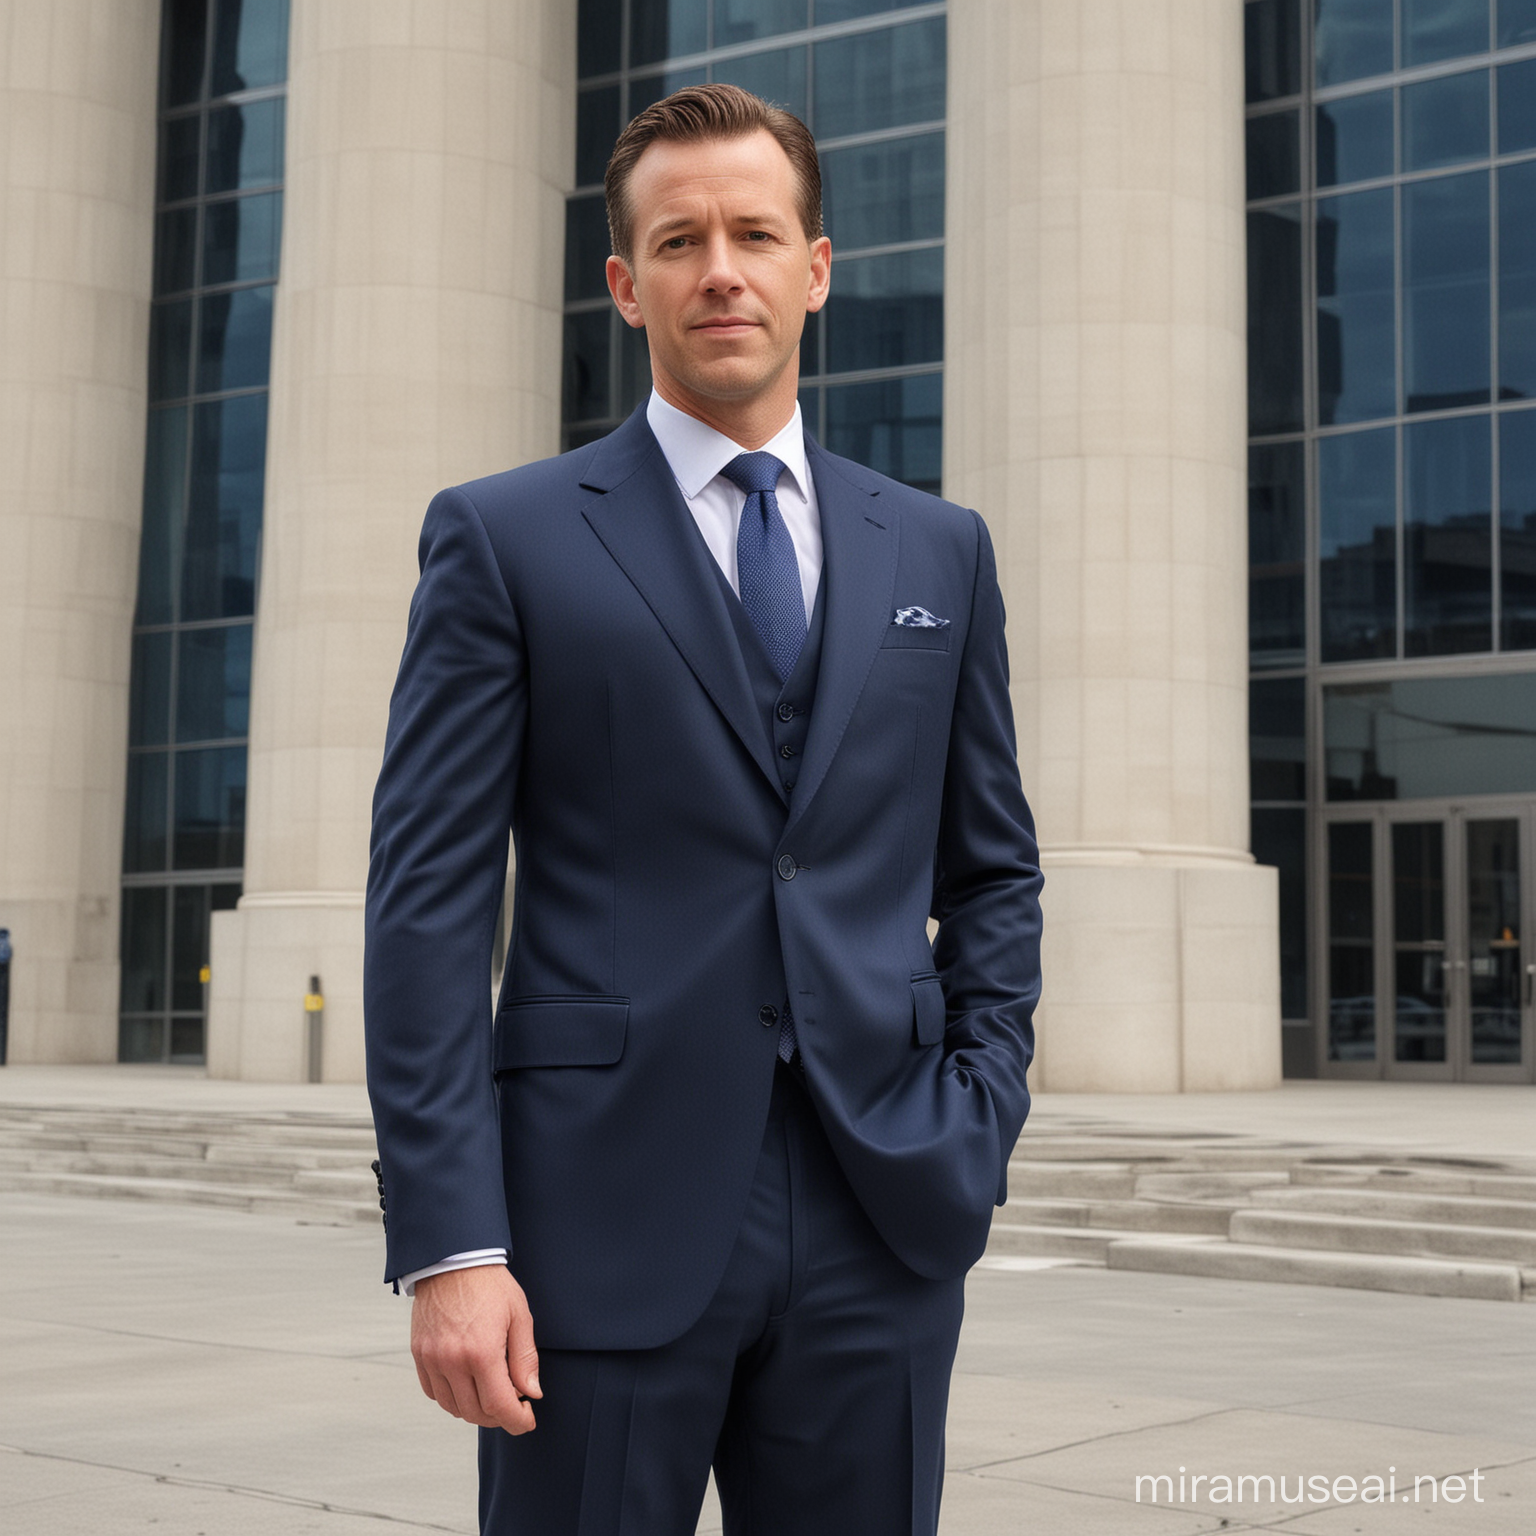 Businessman in Navy Blue Suit Standing in Front of Large Building